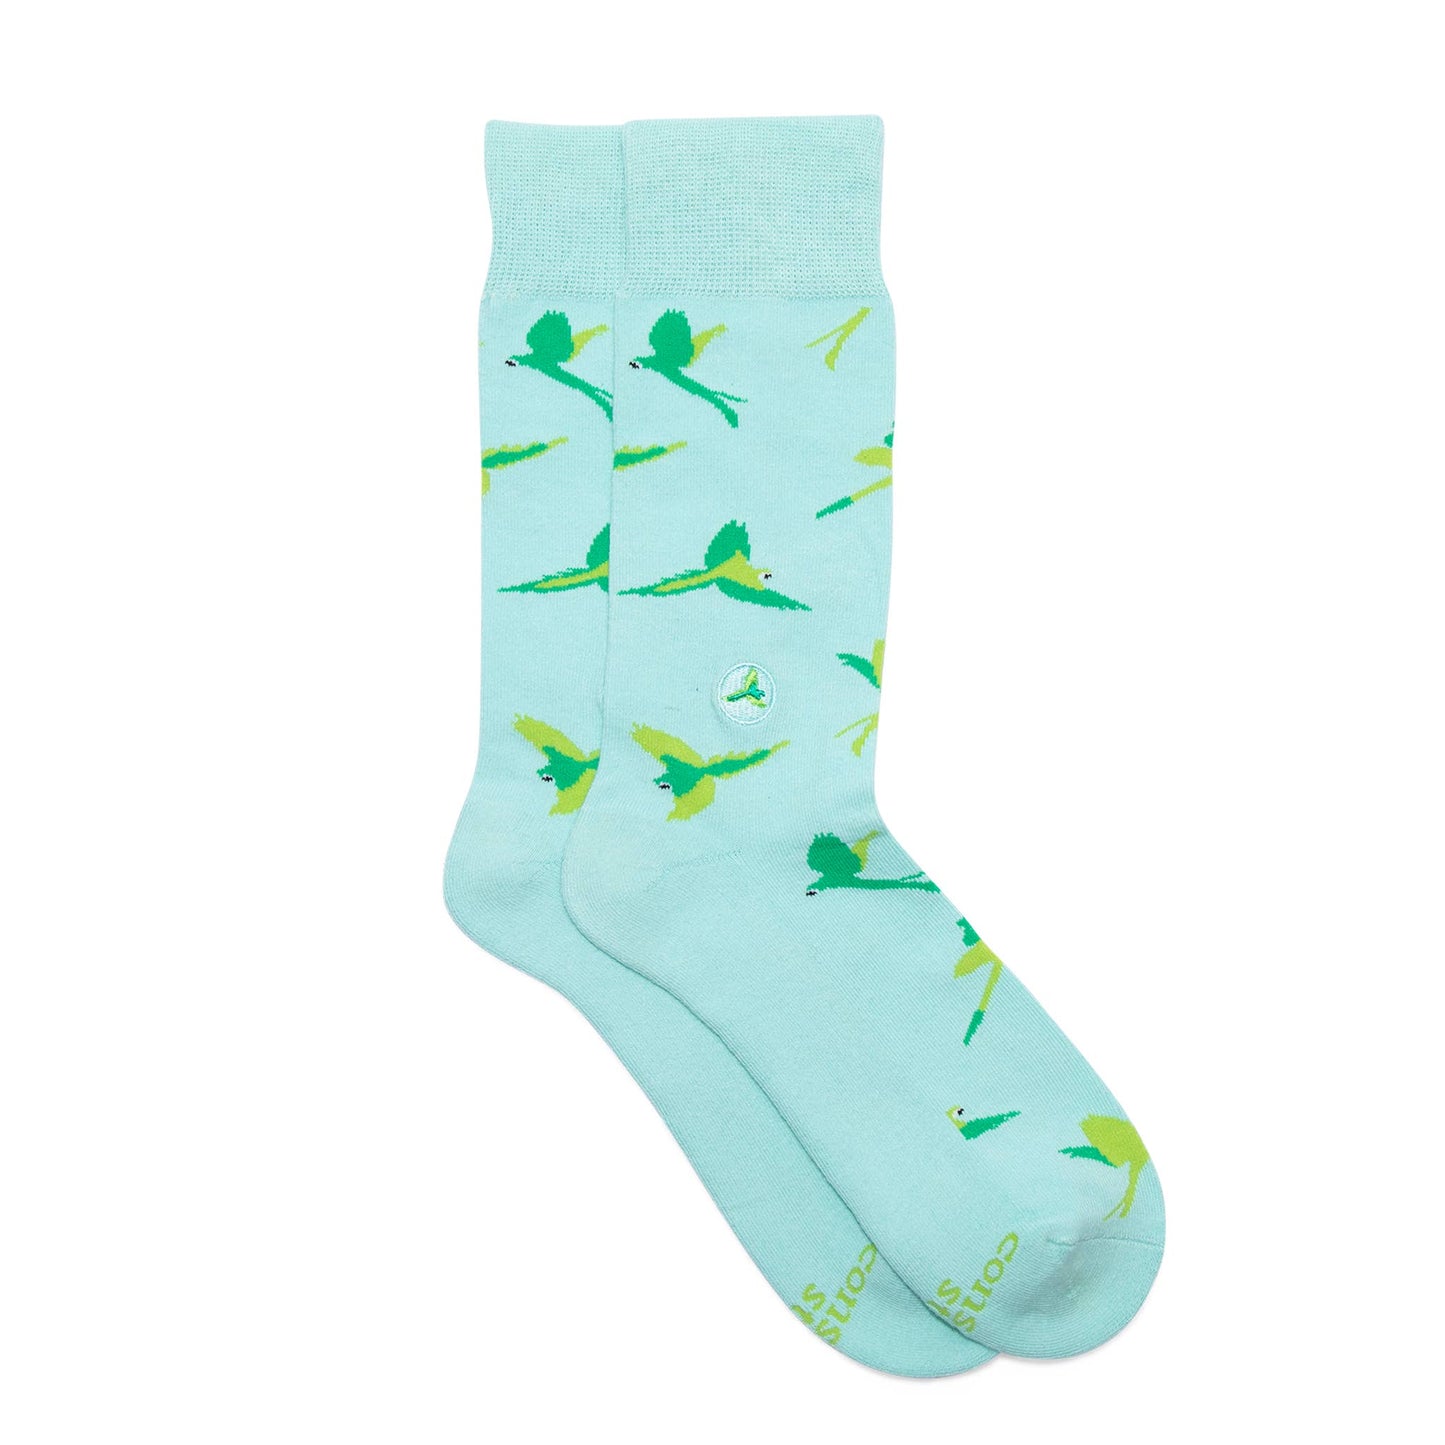 Socks that Protect Macaws: Small